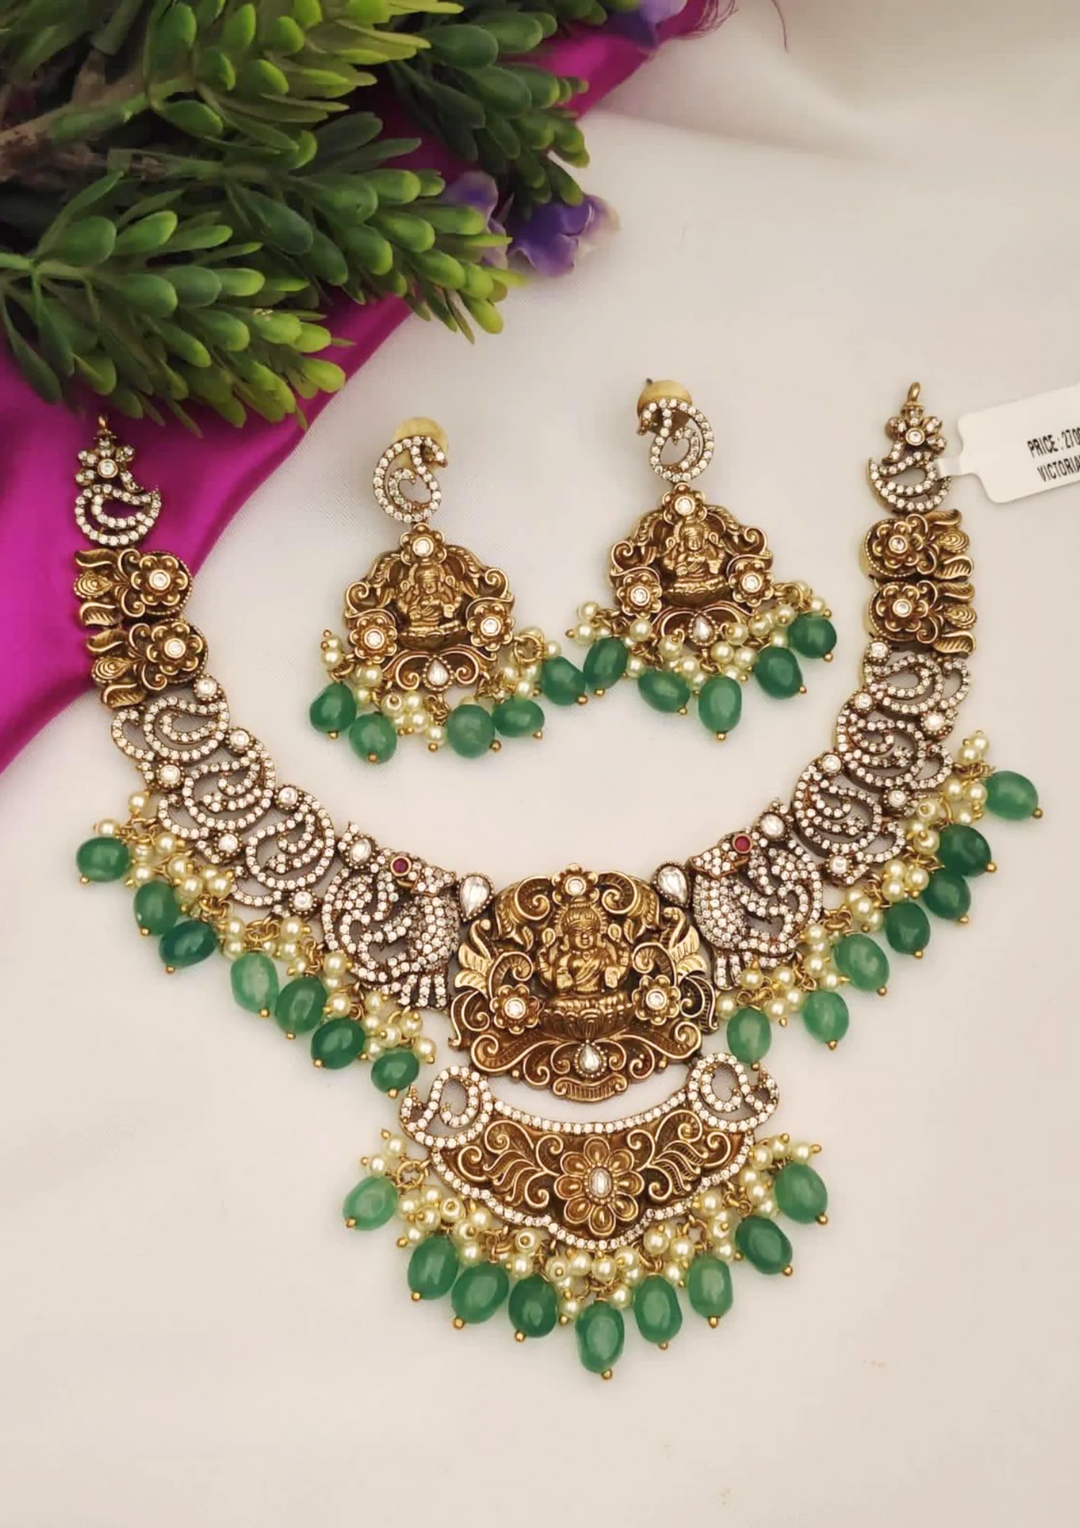 Victorian temple jewellery necklace set with earrings PC’s 270042